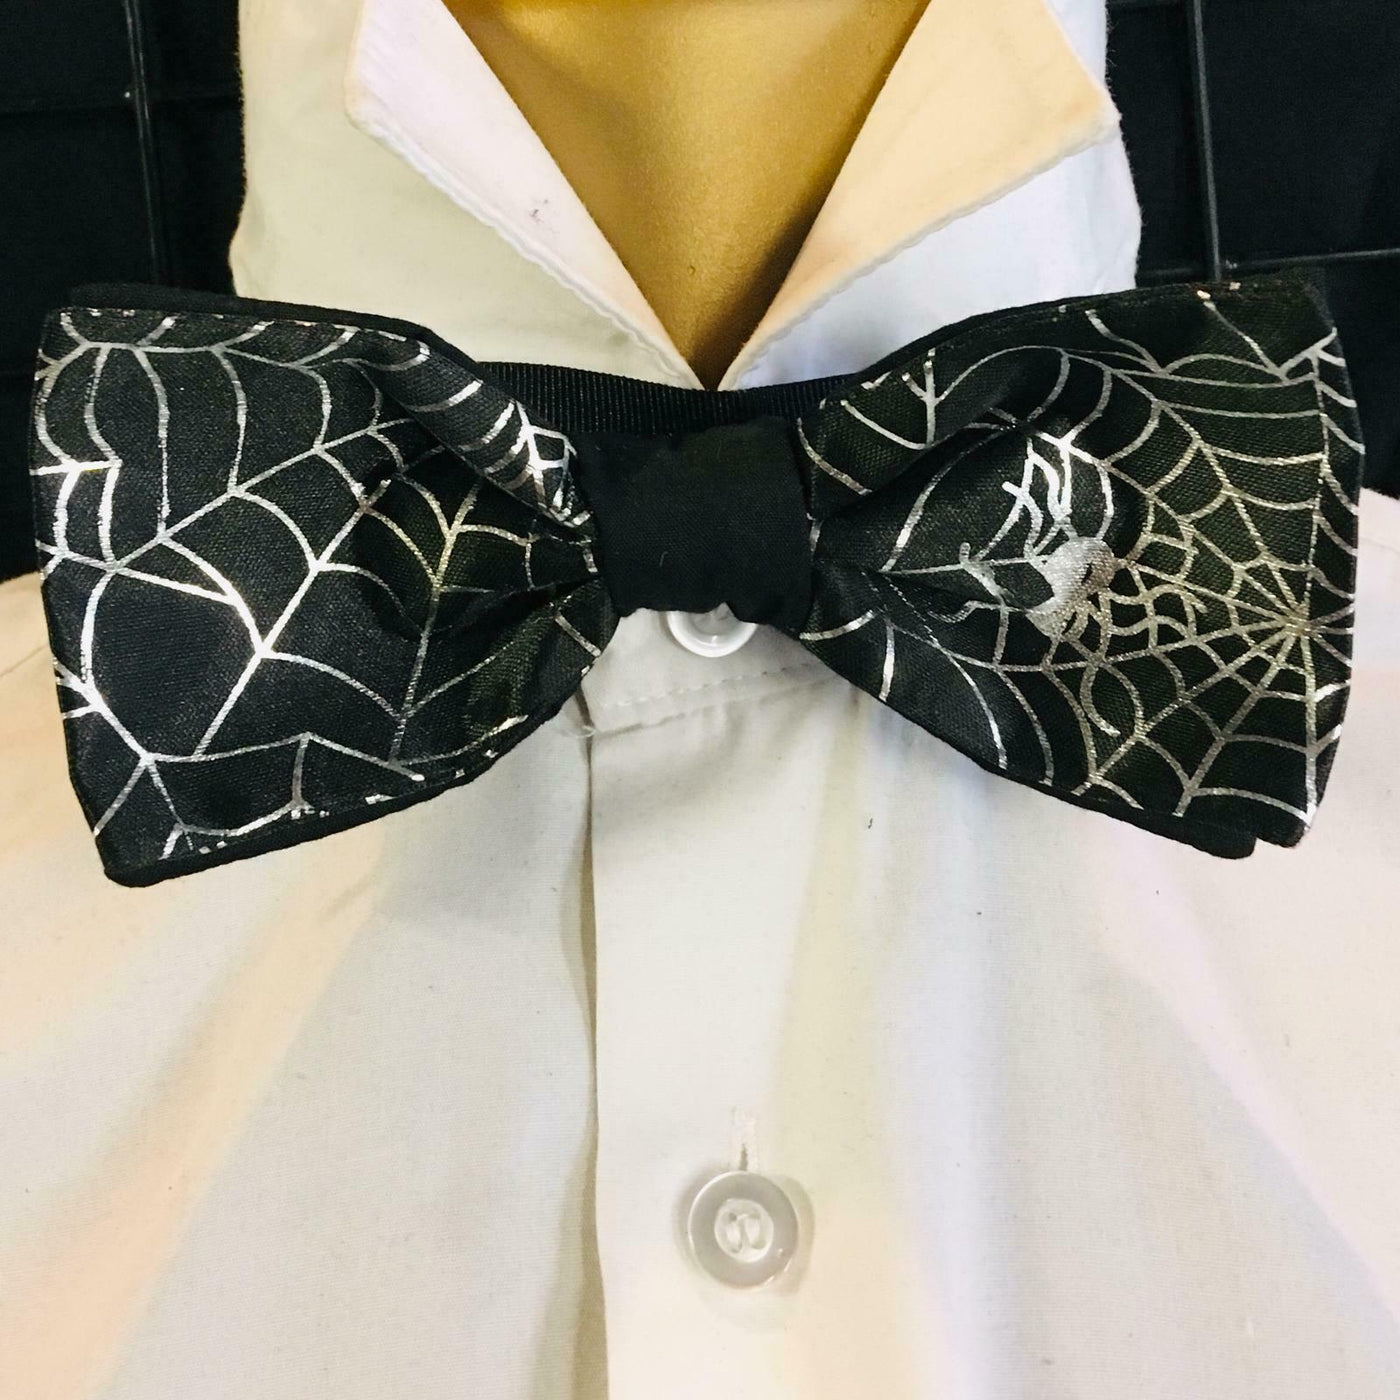 Satin Spider Spiders Web Pre-tied Bow Tie Hair Bow Prom Bowtie Dickie feeanddave